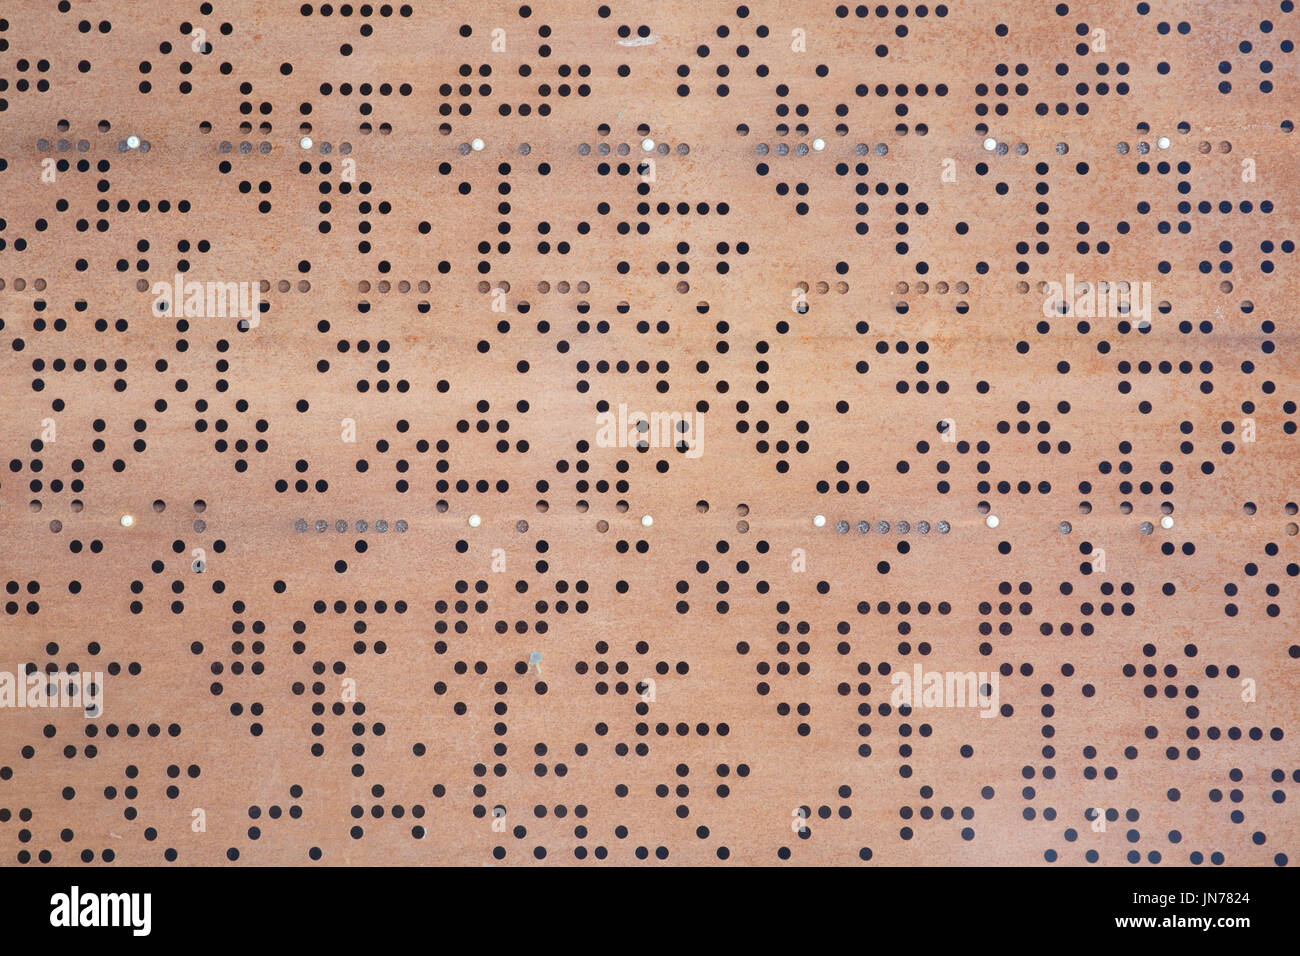 Painted Circle Perforated Metal Panel For Texture And Background Stock Photo Alamy